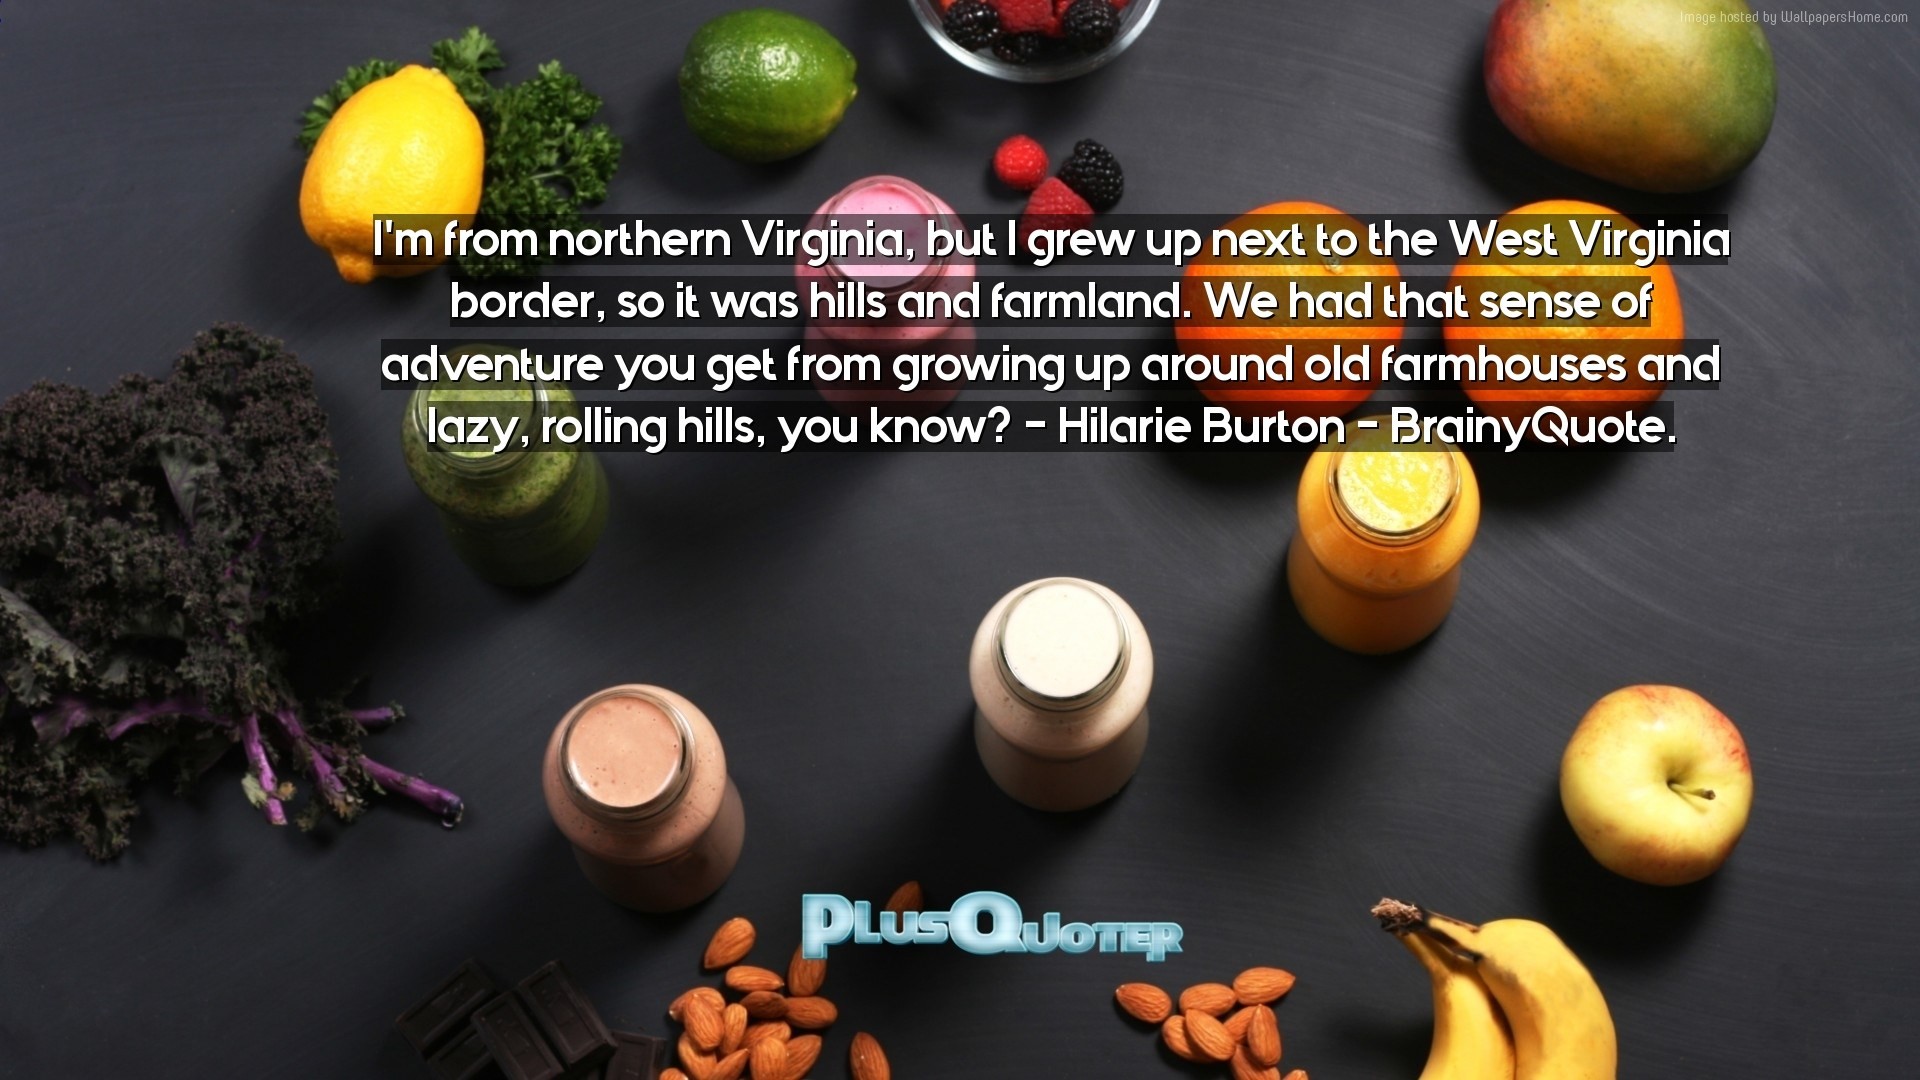 1920x1080 “I'm from northern Virginia, but I grew up next to the West Virginia  border, so it was hills and farmland. We had that sense of adventure you  get from ...